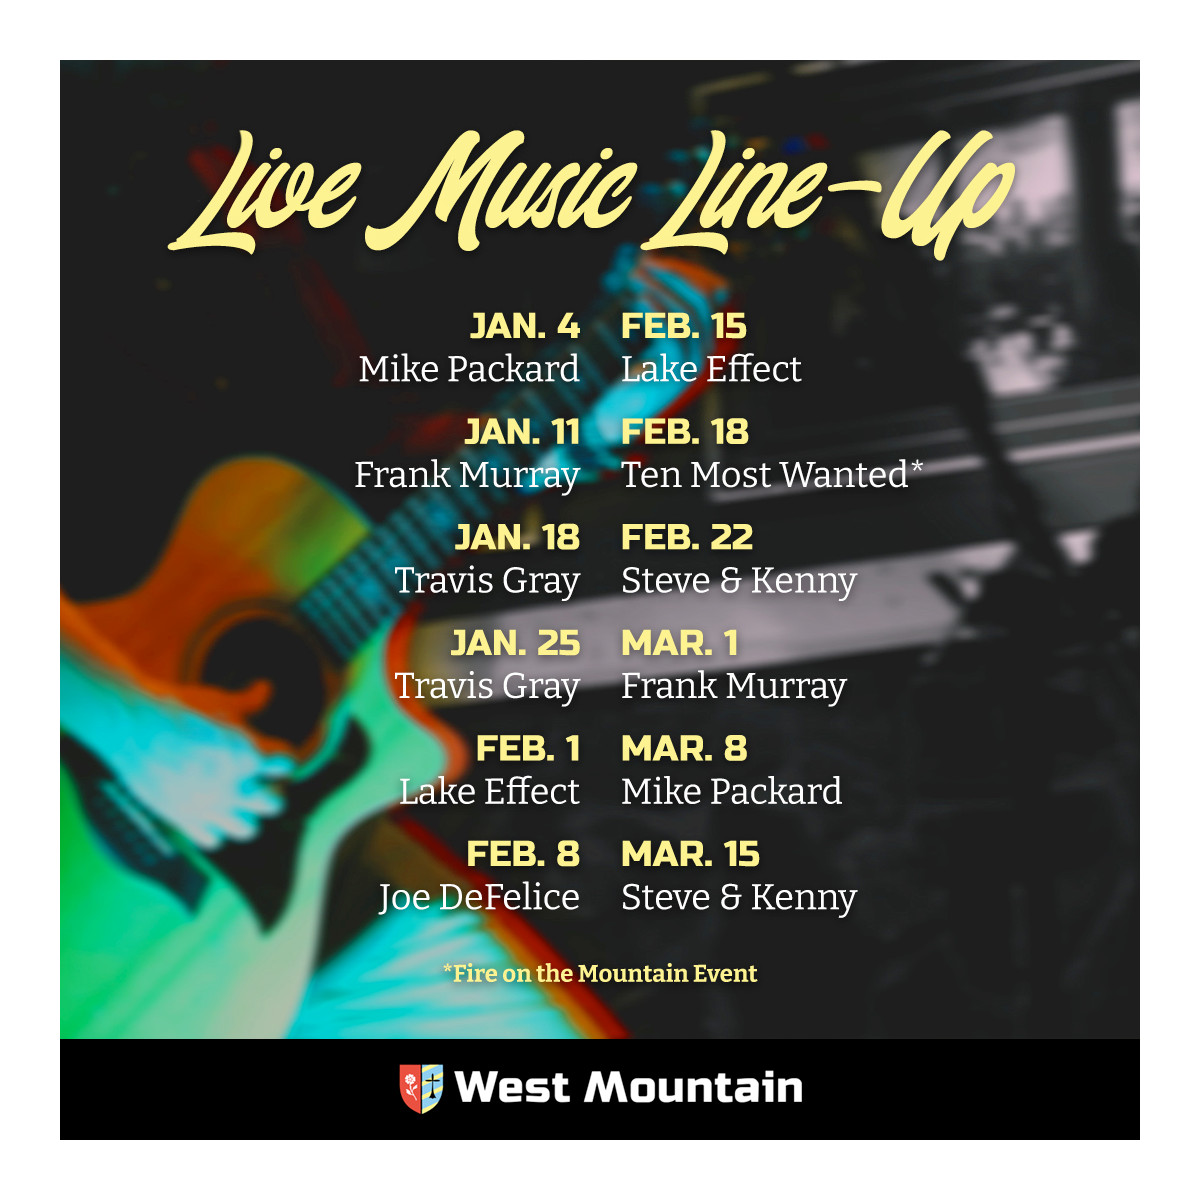 West Mountain Music Lineup